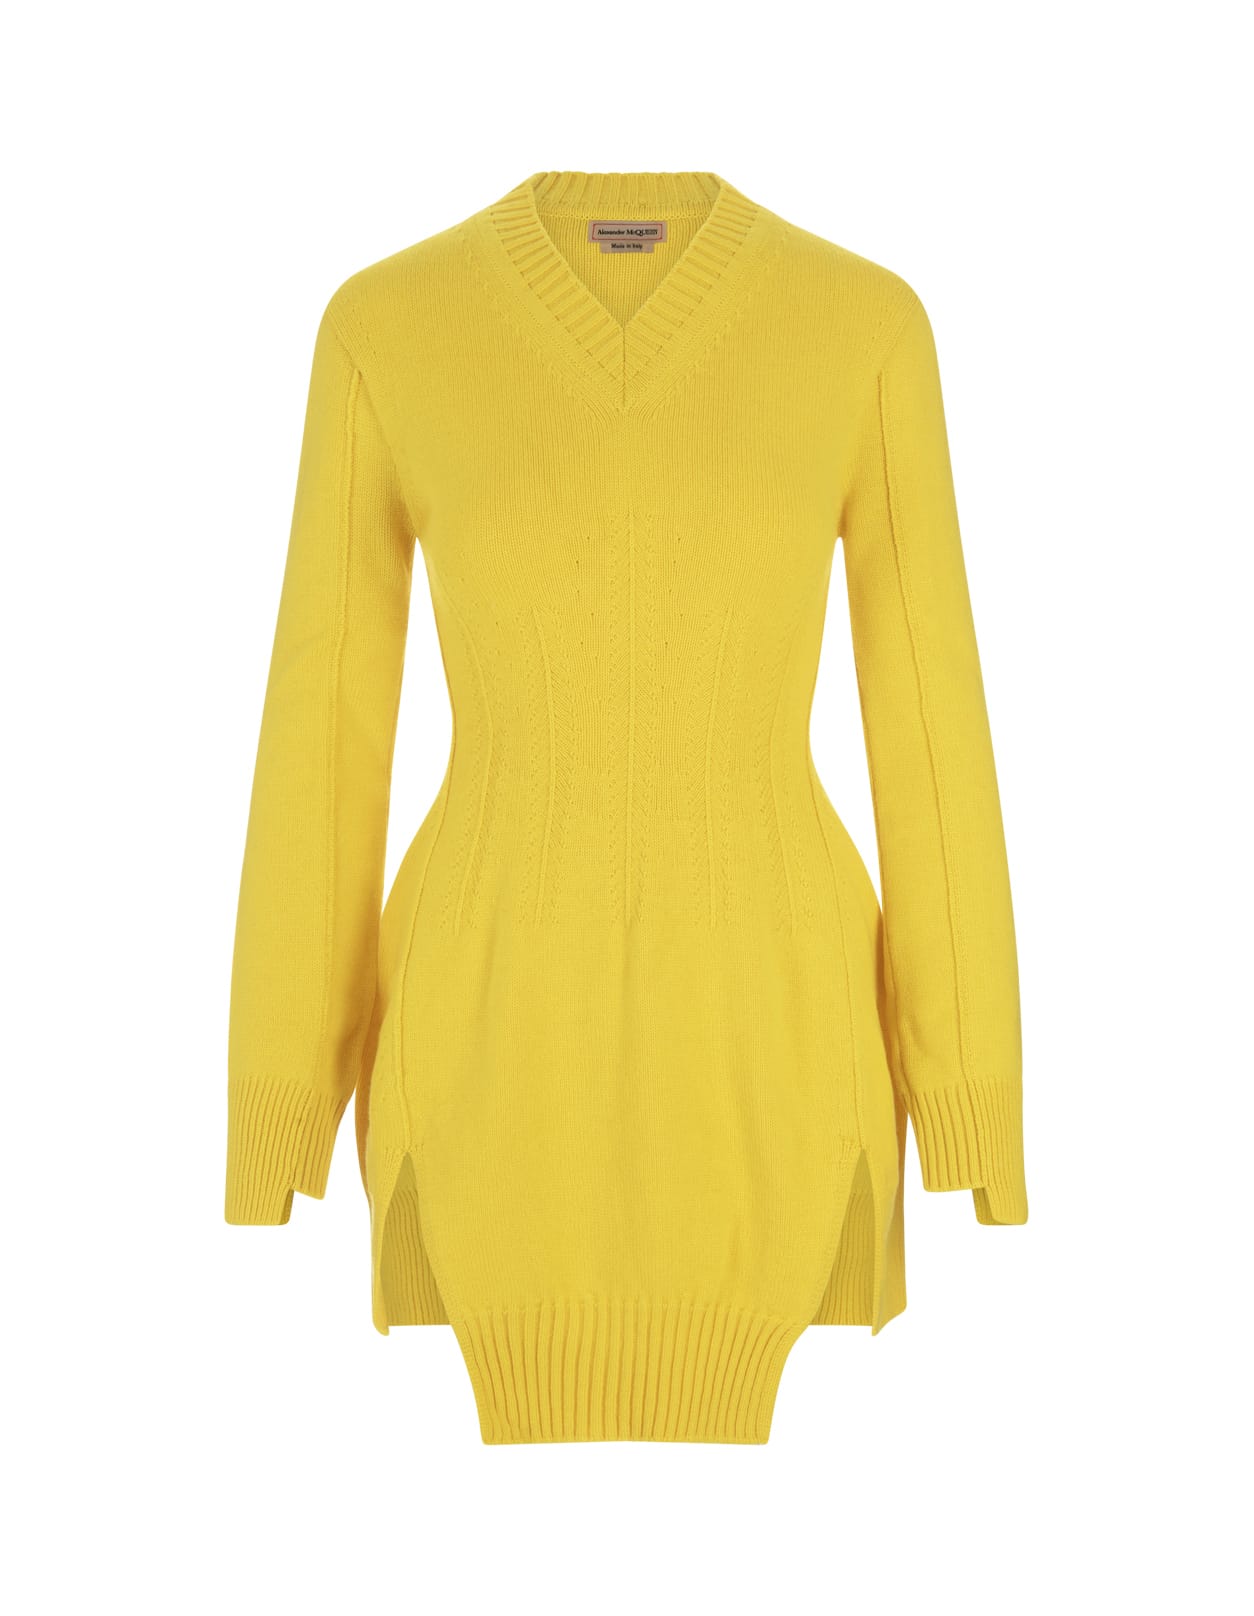 Alexander McQueen Yellow Cashmere Tunic Sweater With Corset Stitching